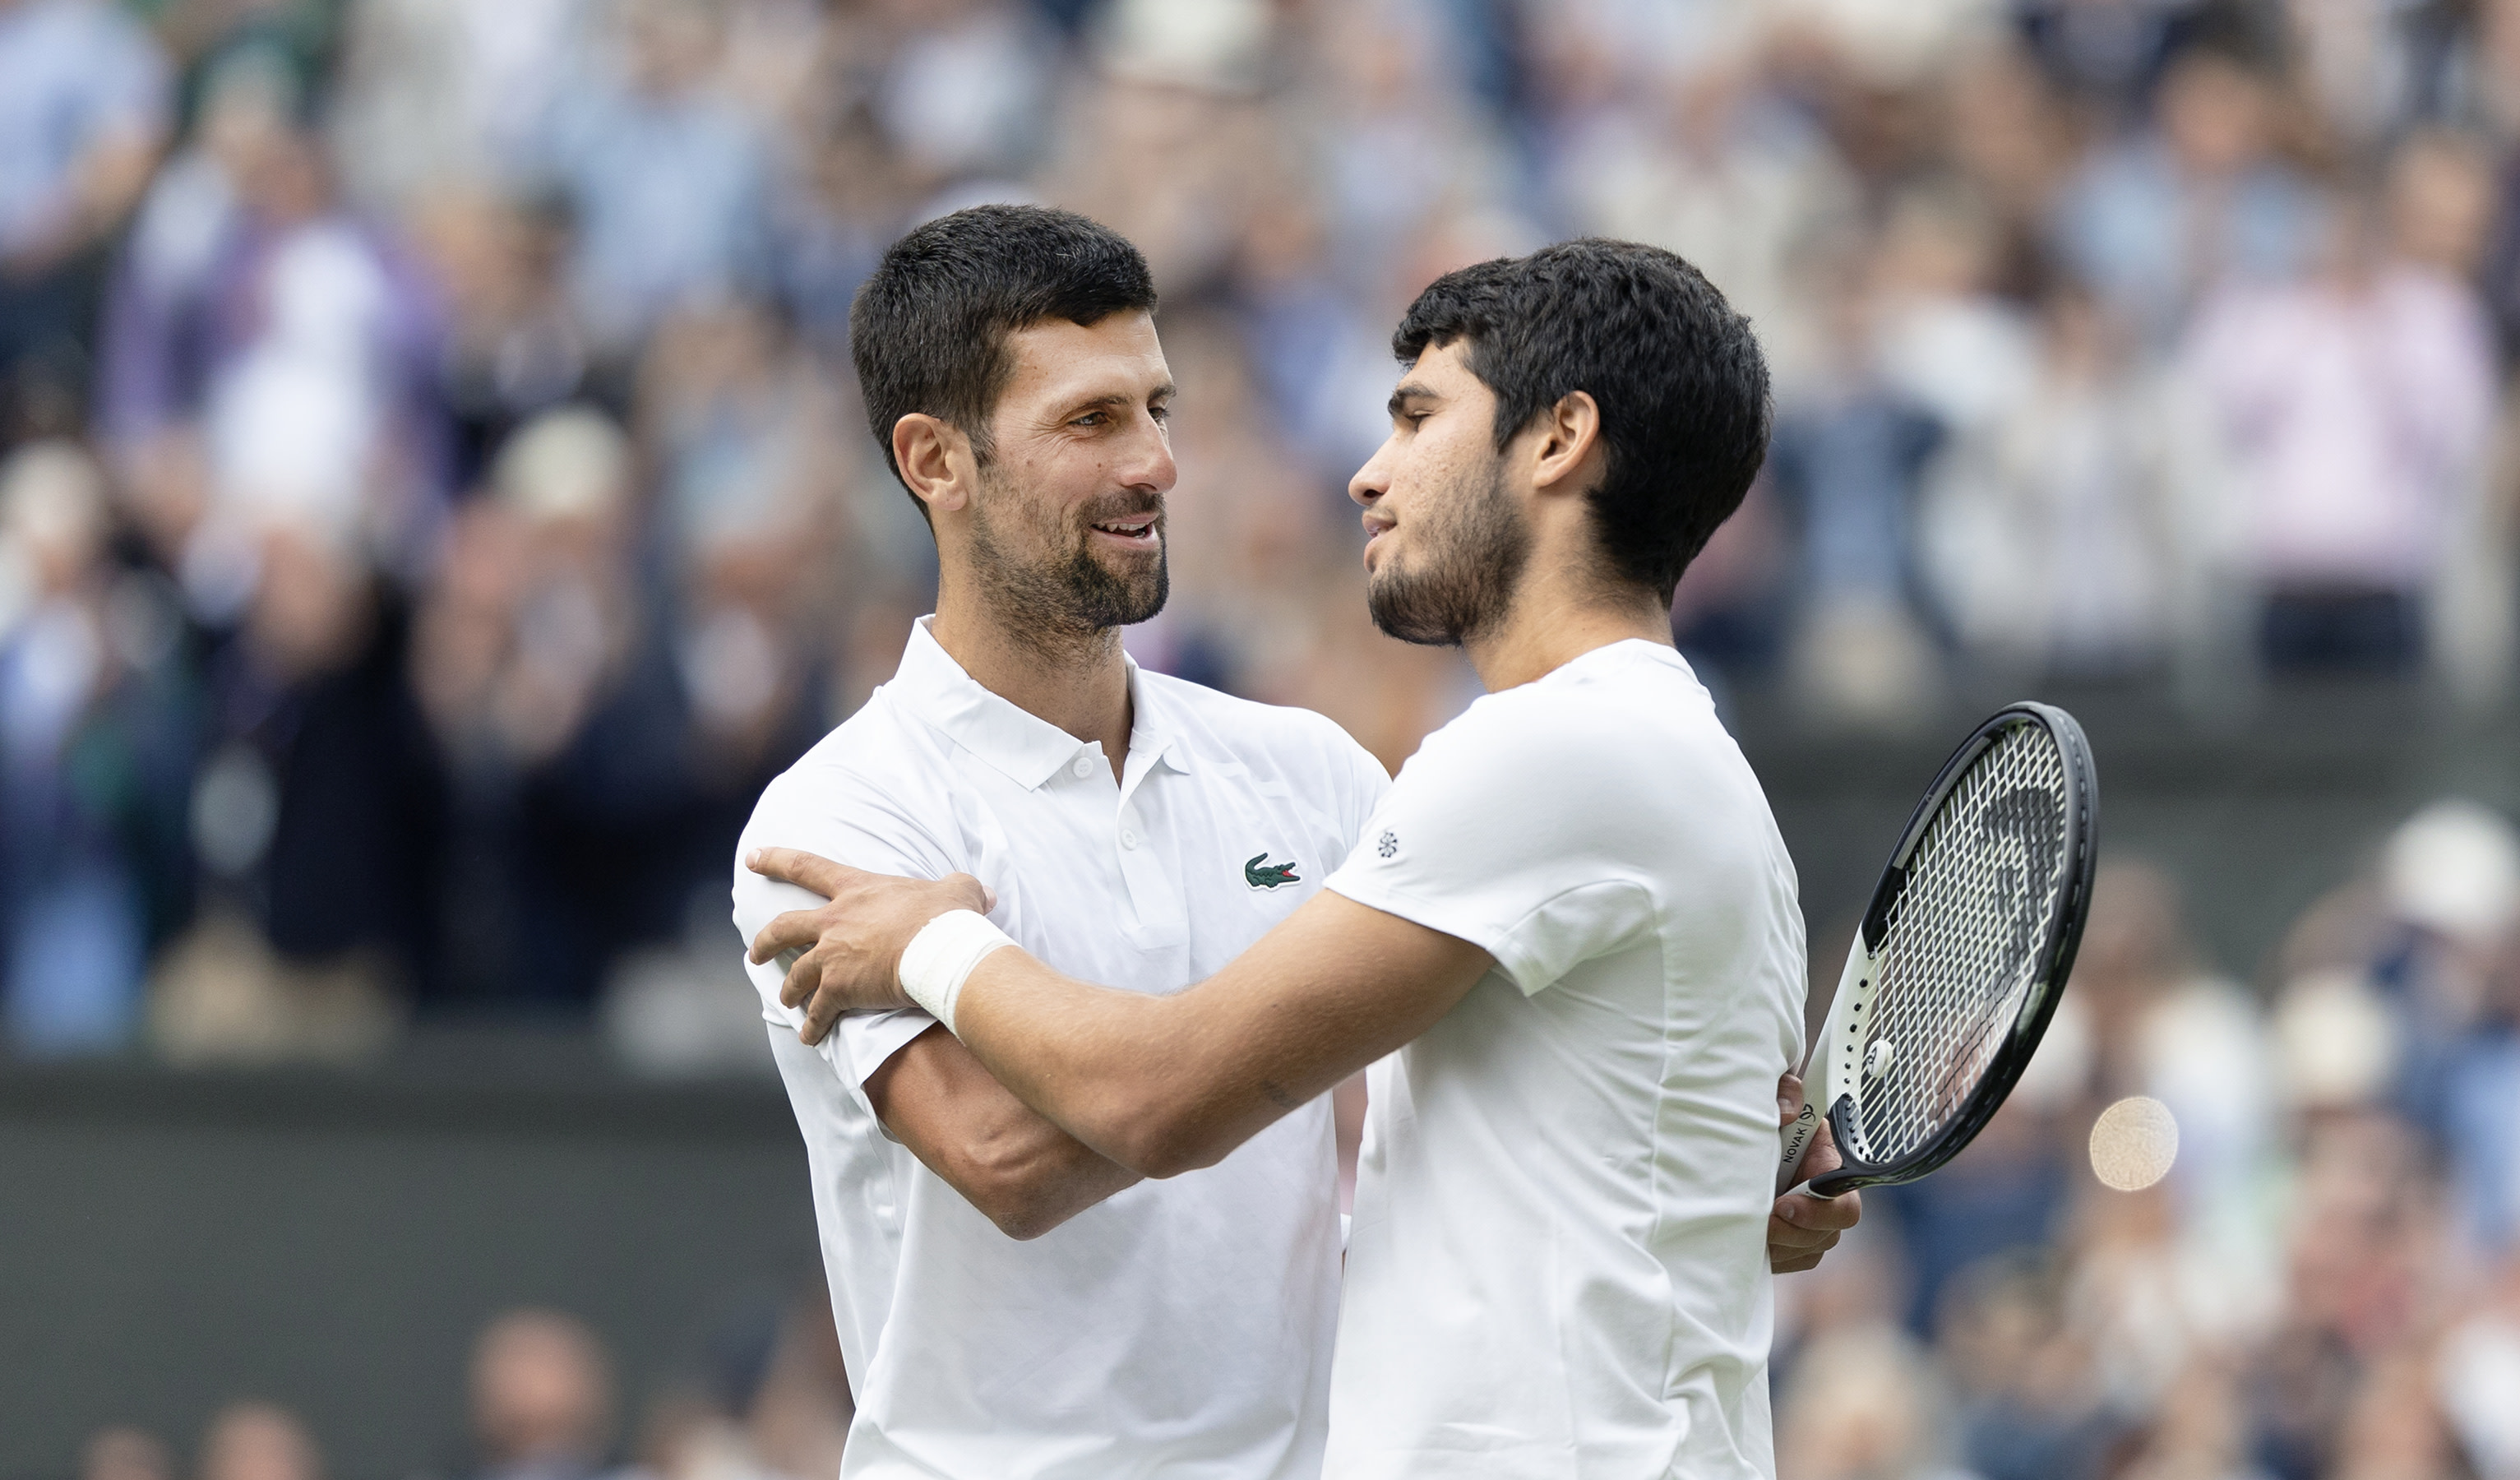 What are the chances Novak Djokovic and Carlos Alcaraz duel at the US Open?